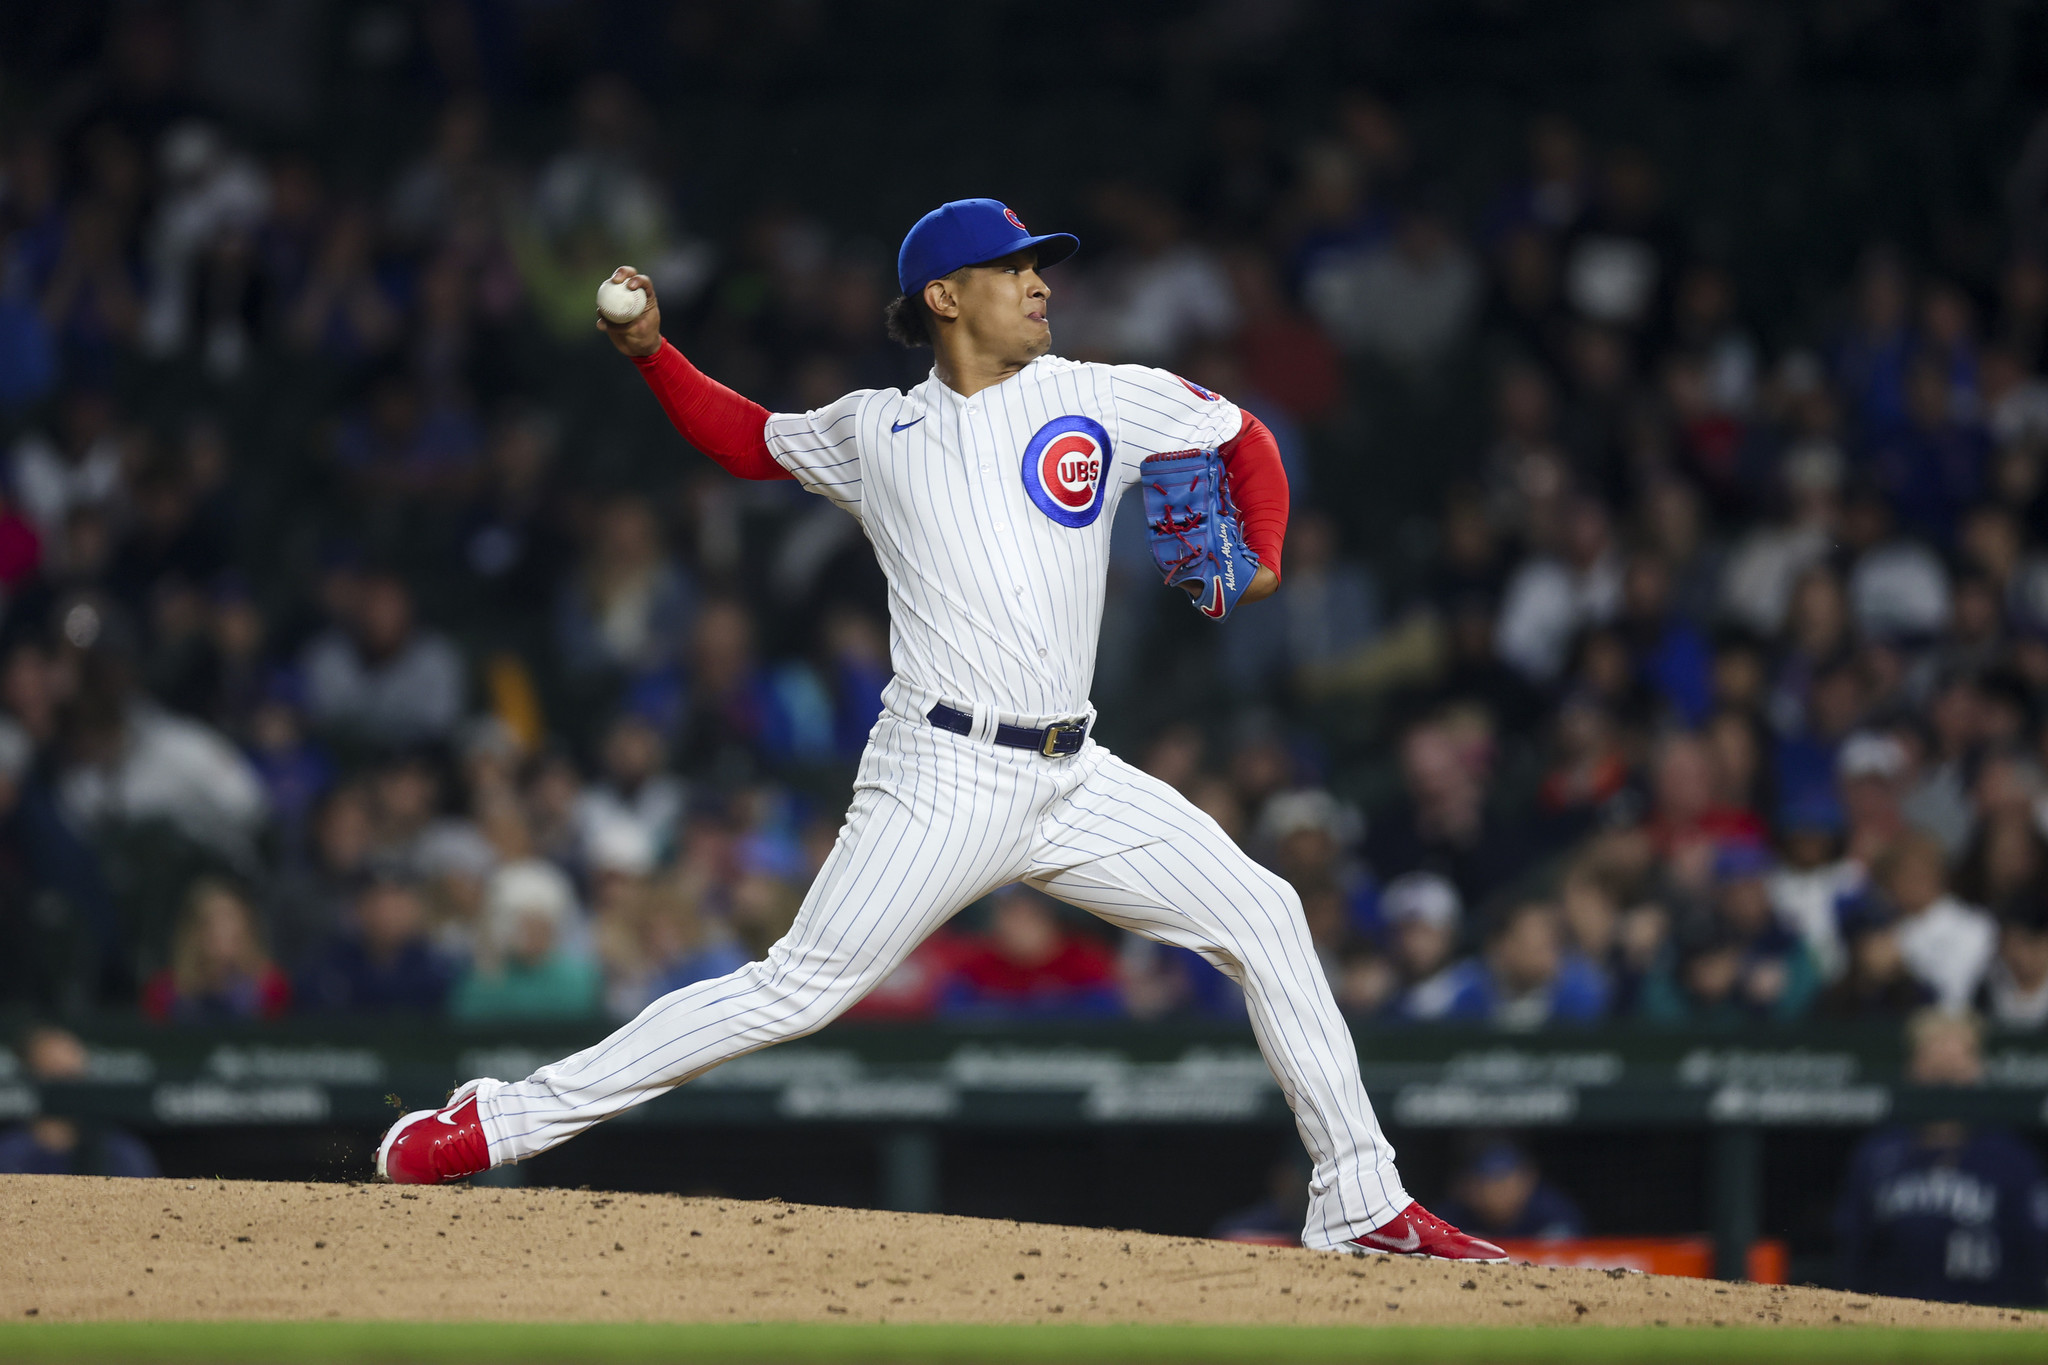 Hoerner's single in 10th inning lifts Cubs past Mariners 3-2 - Newsday